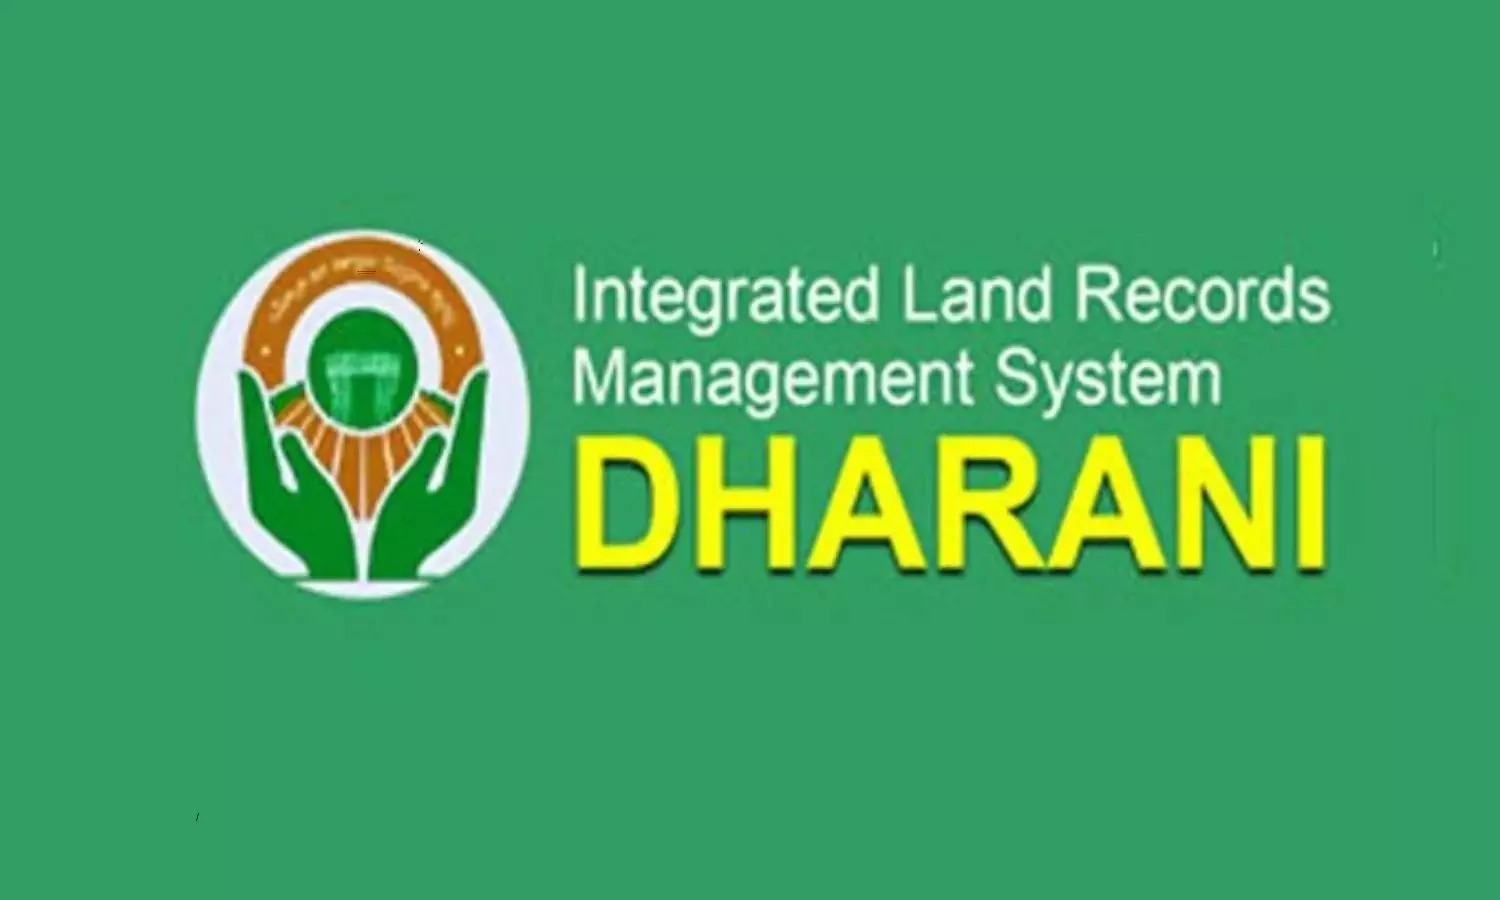 The Dharani Committee prepared the report